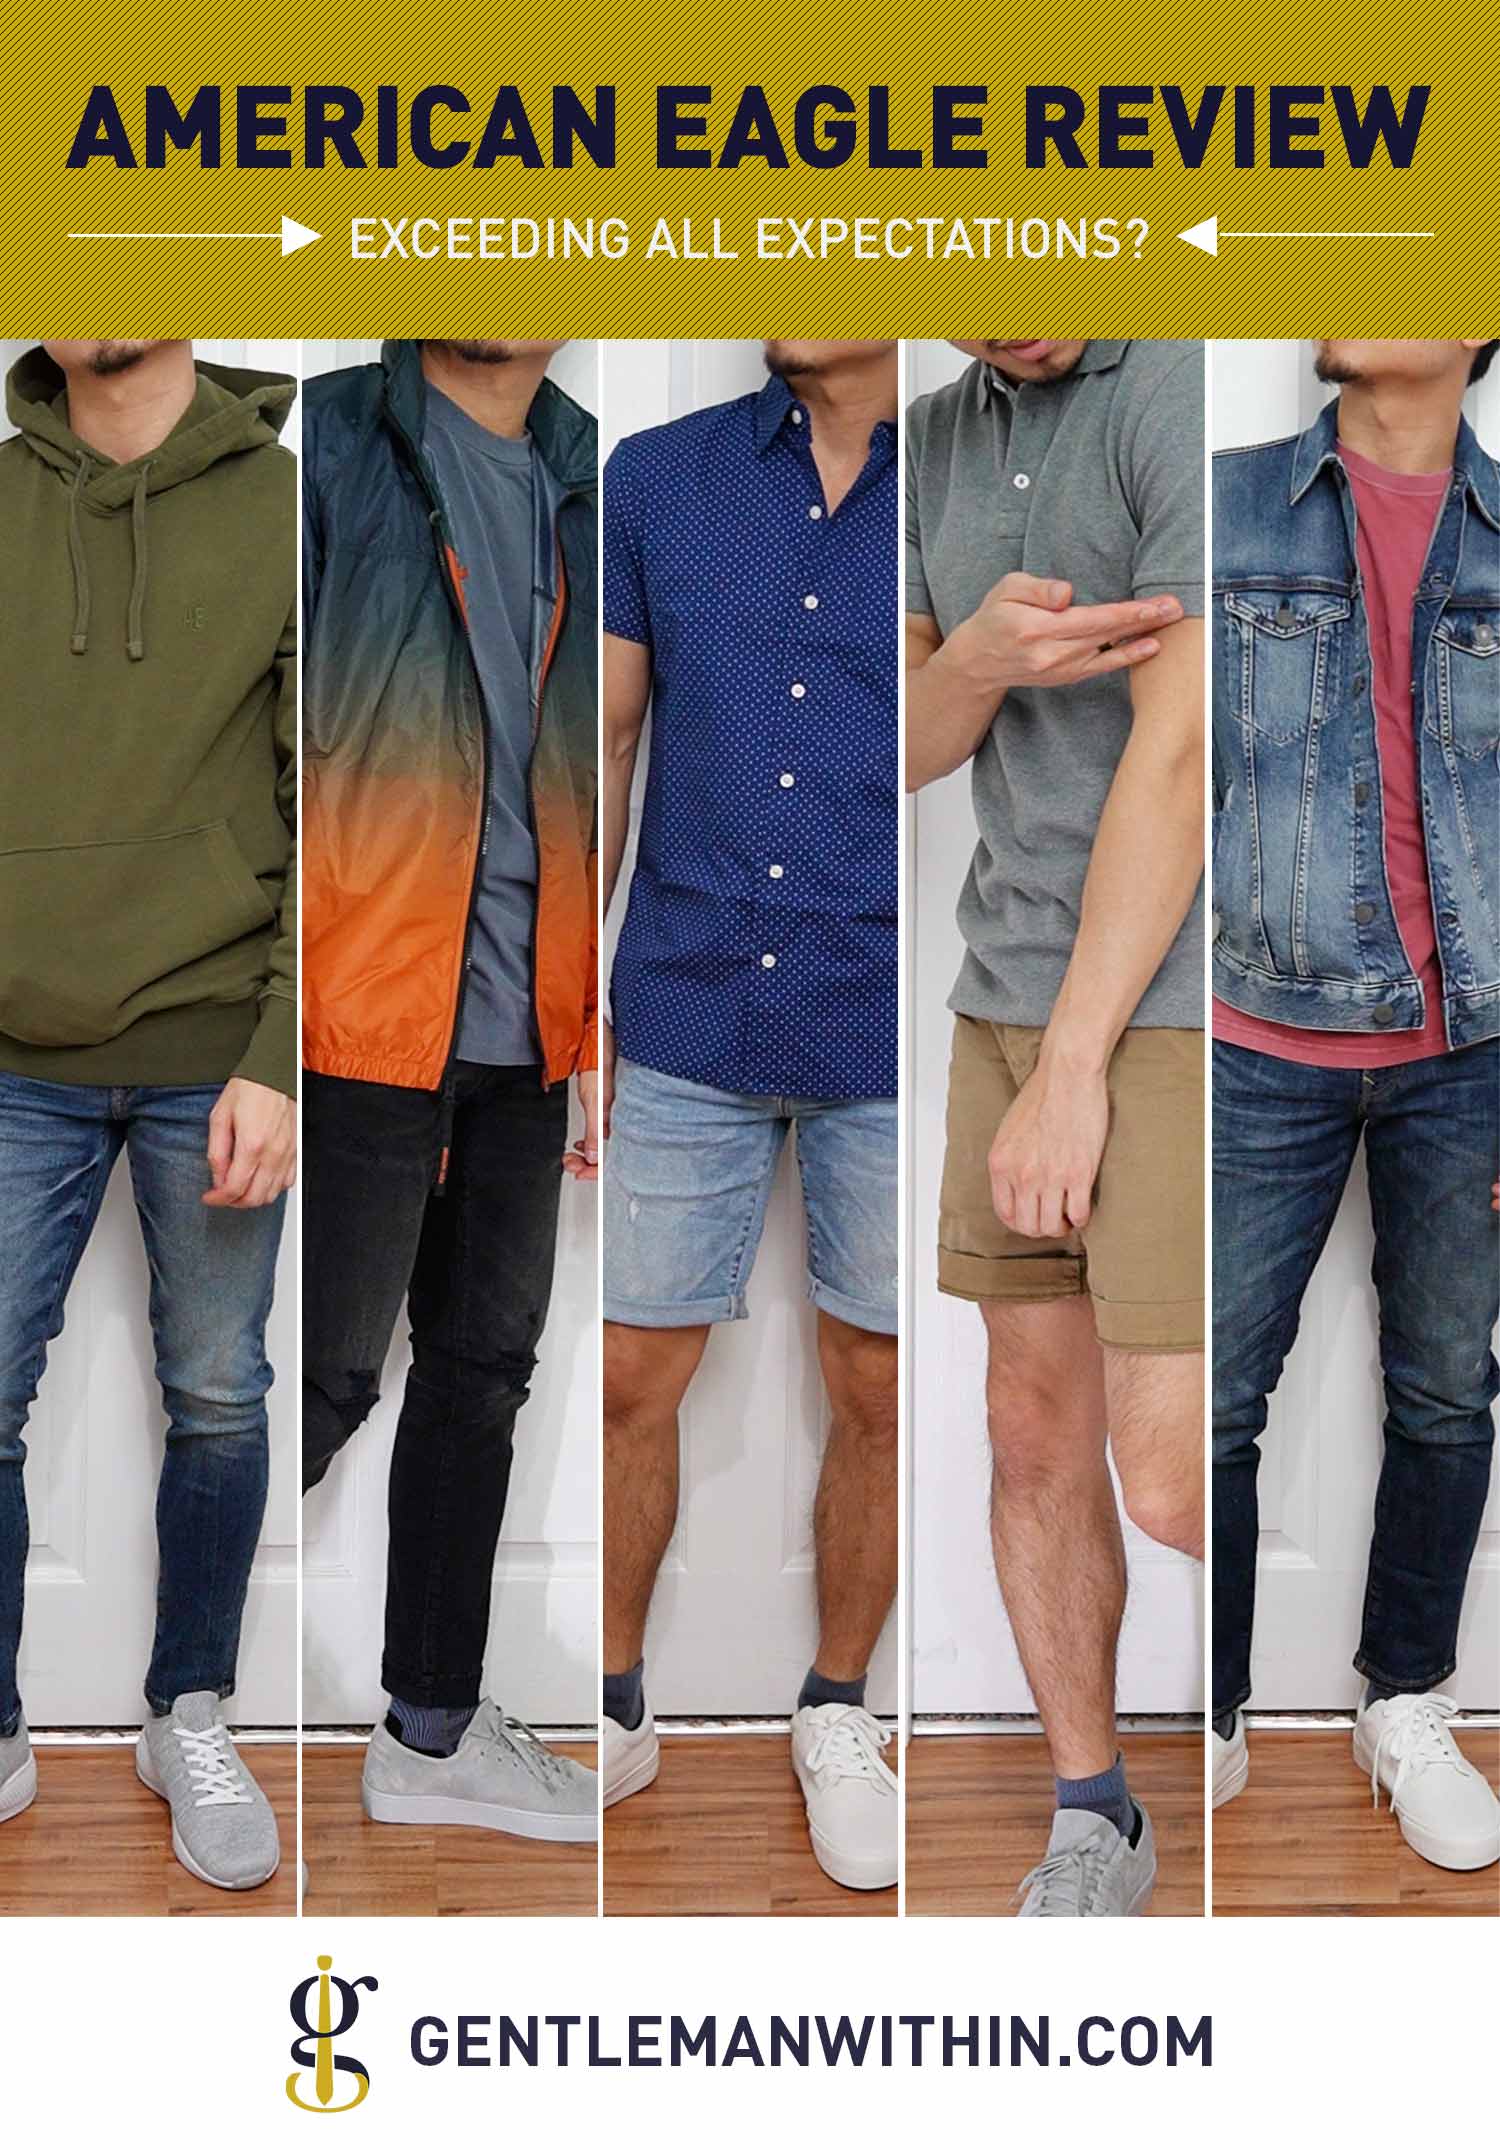 American Eagle Review & Try-On Haul (Exceeding All Expectations?) | GENTLEMAN WITHIN